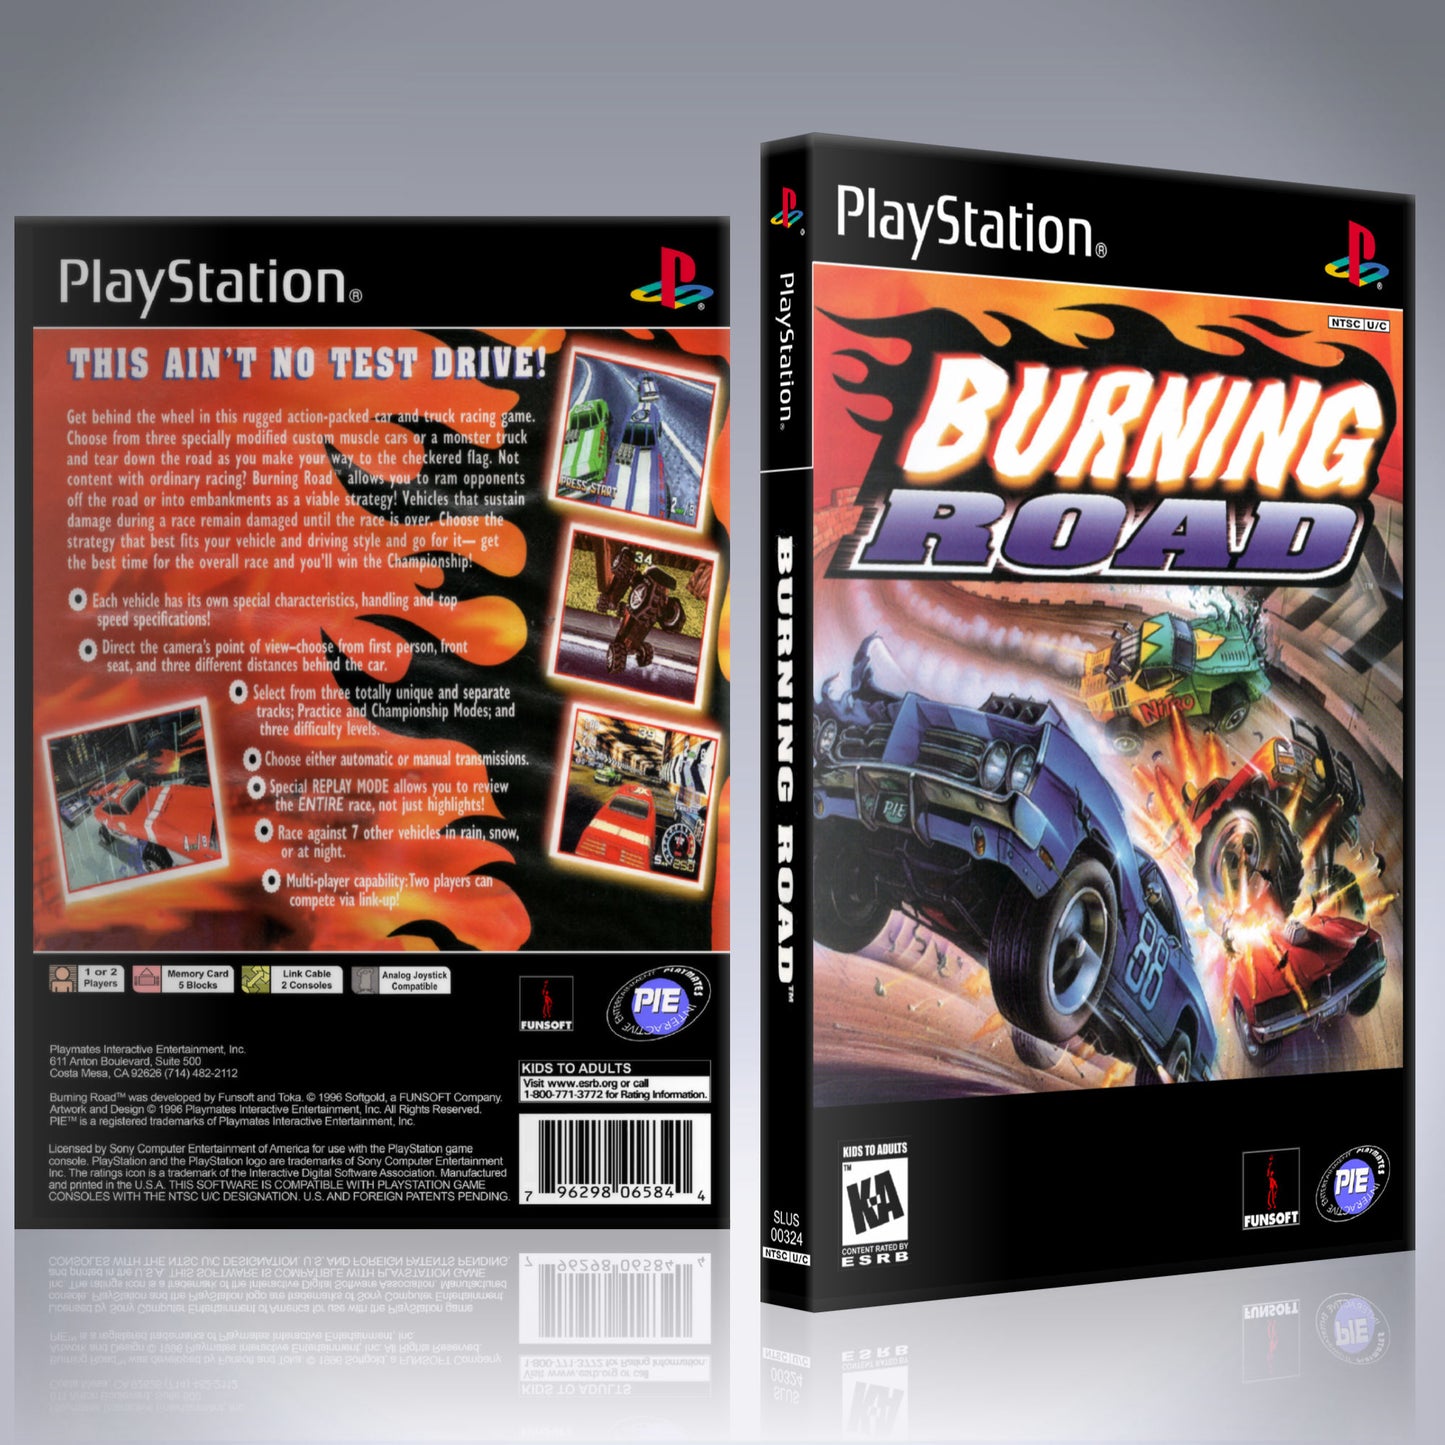 PS1 Case - NO GAME - Burning Road